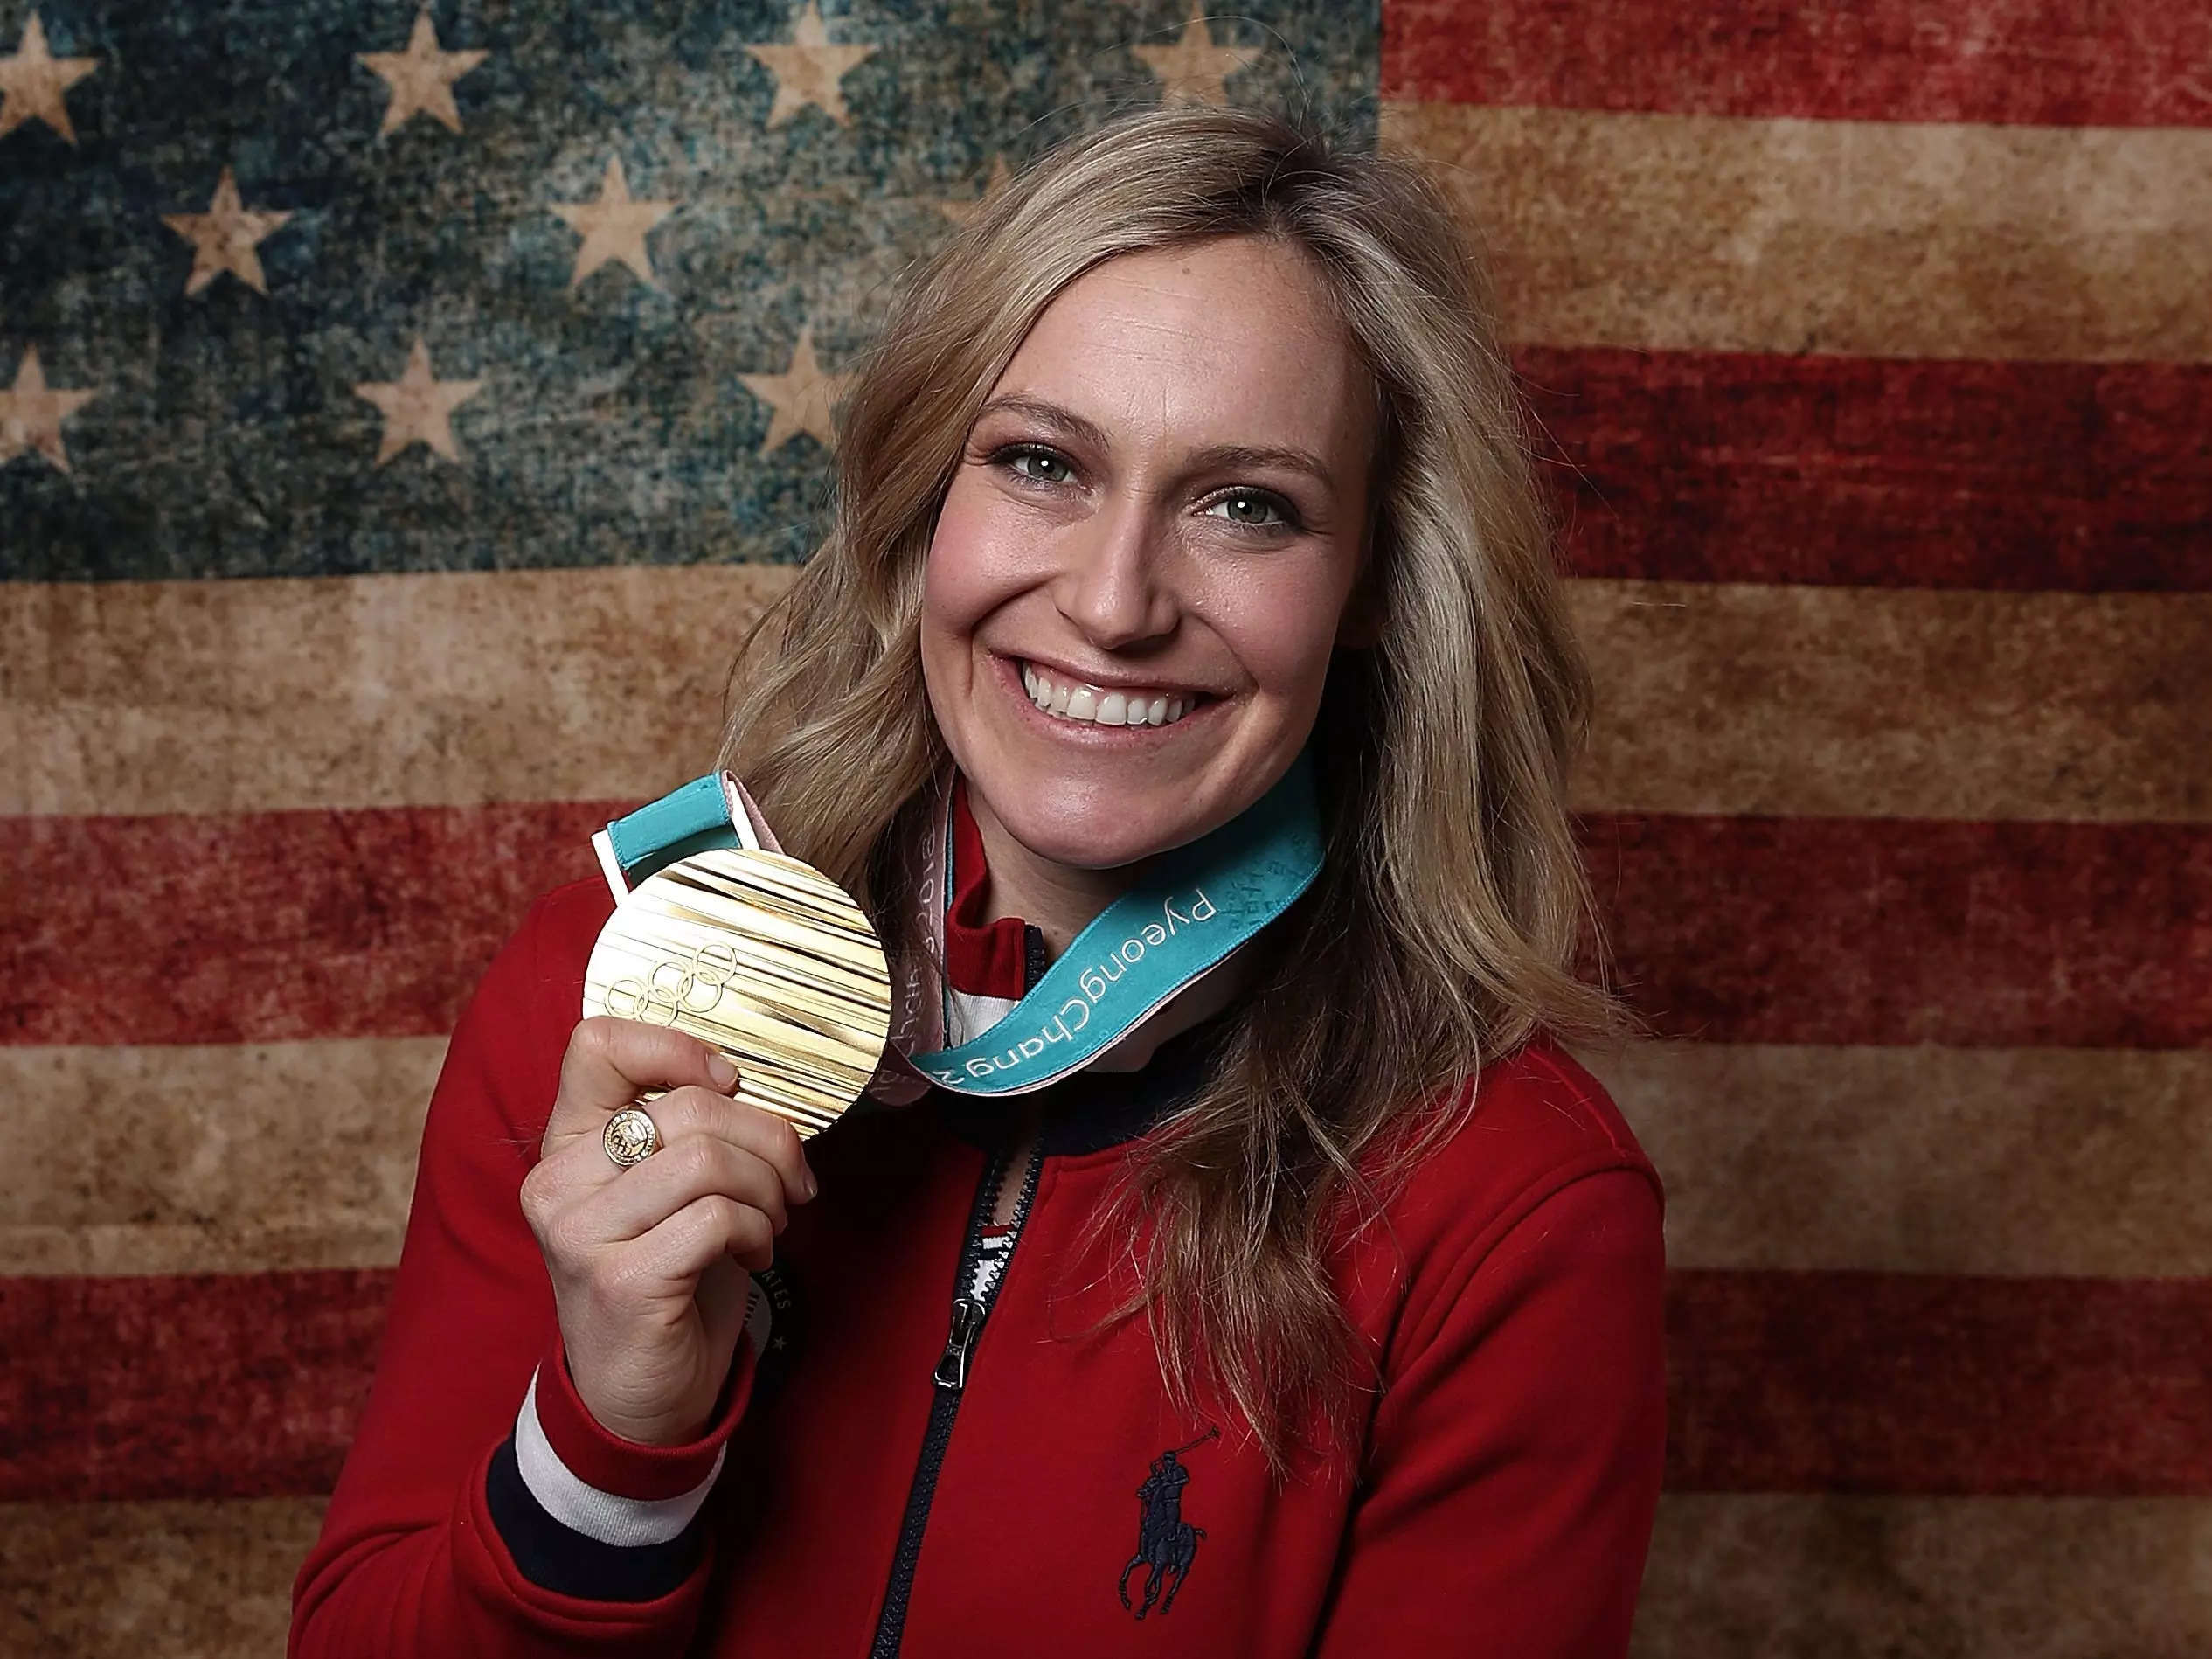 An Olympic gold medalist says chicken bone broth is a ‘superfood’ keeping her healthy ahead of The Games — and shares her go-to recipe